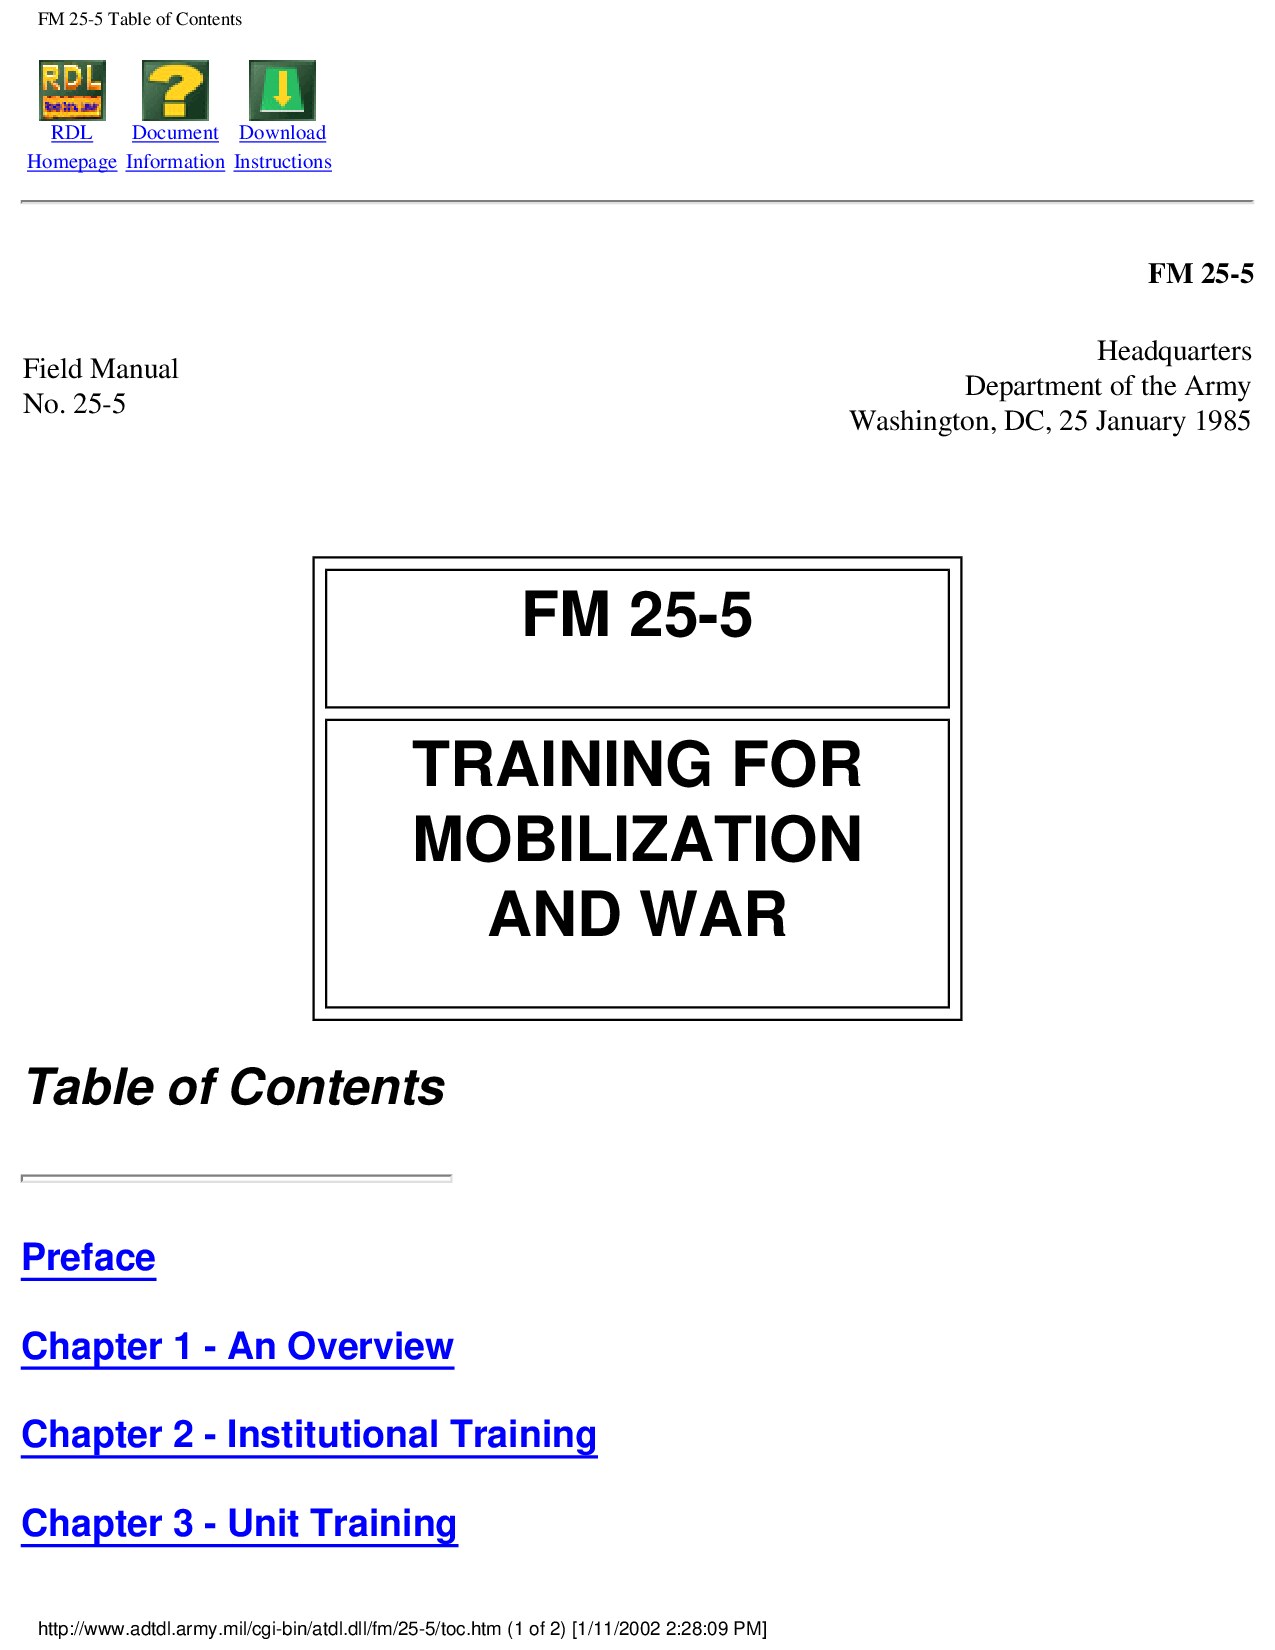 Training for Mobilization and War